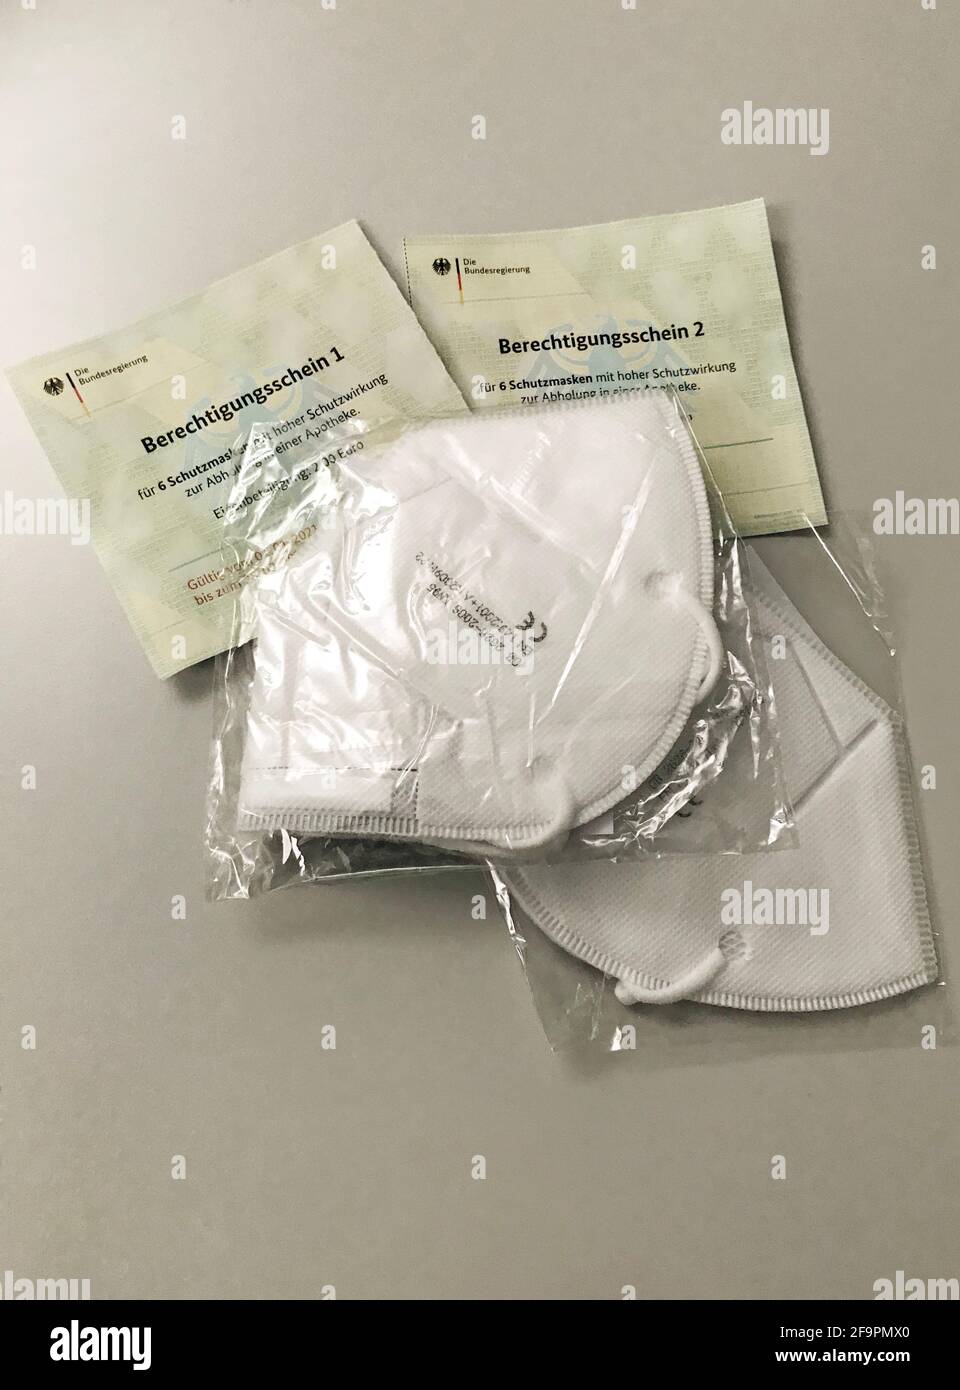 26.01.2021, Berlin, , Germany - FFP2 masks are on authorization slips from the federal government for picking up protective masks at the pharmacy. 00S Stock Photo